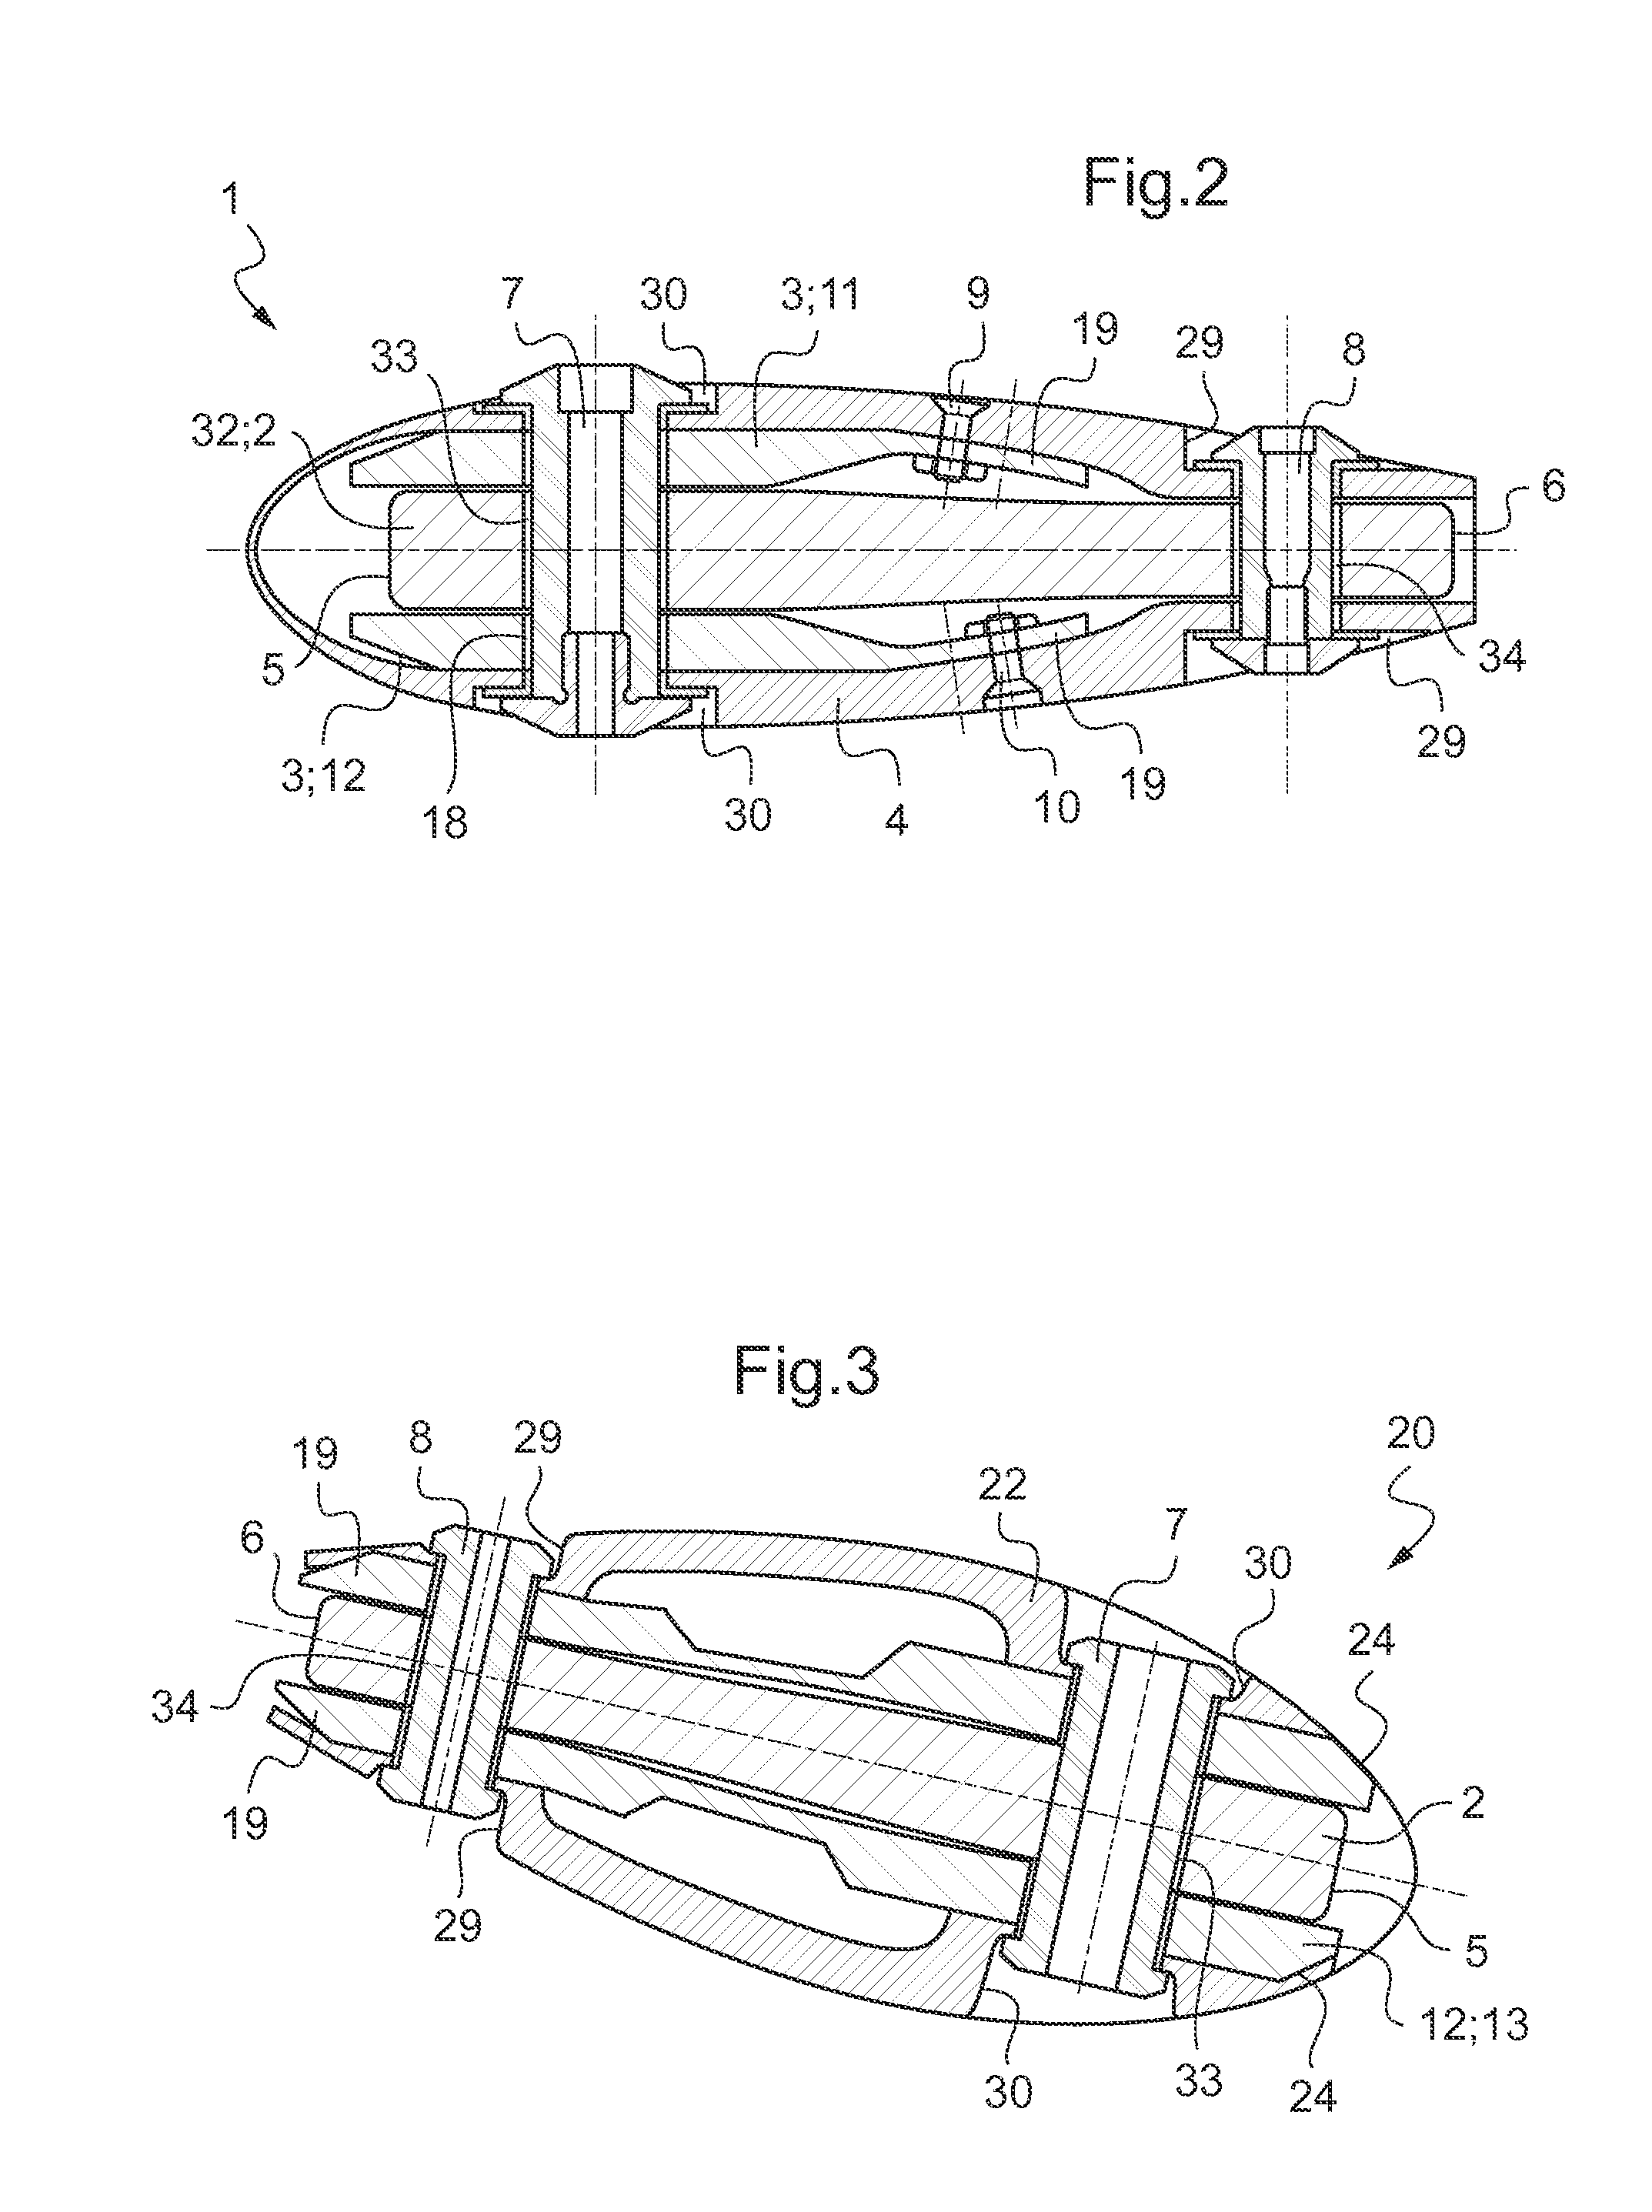 Airfoil blade of a bearingless rotor of a helicopter